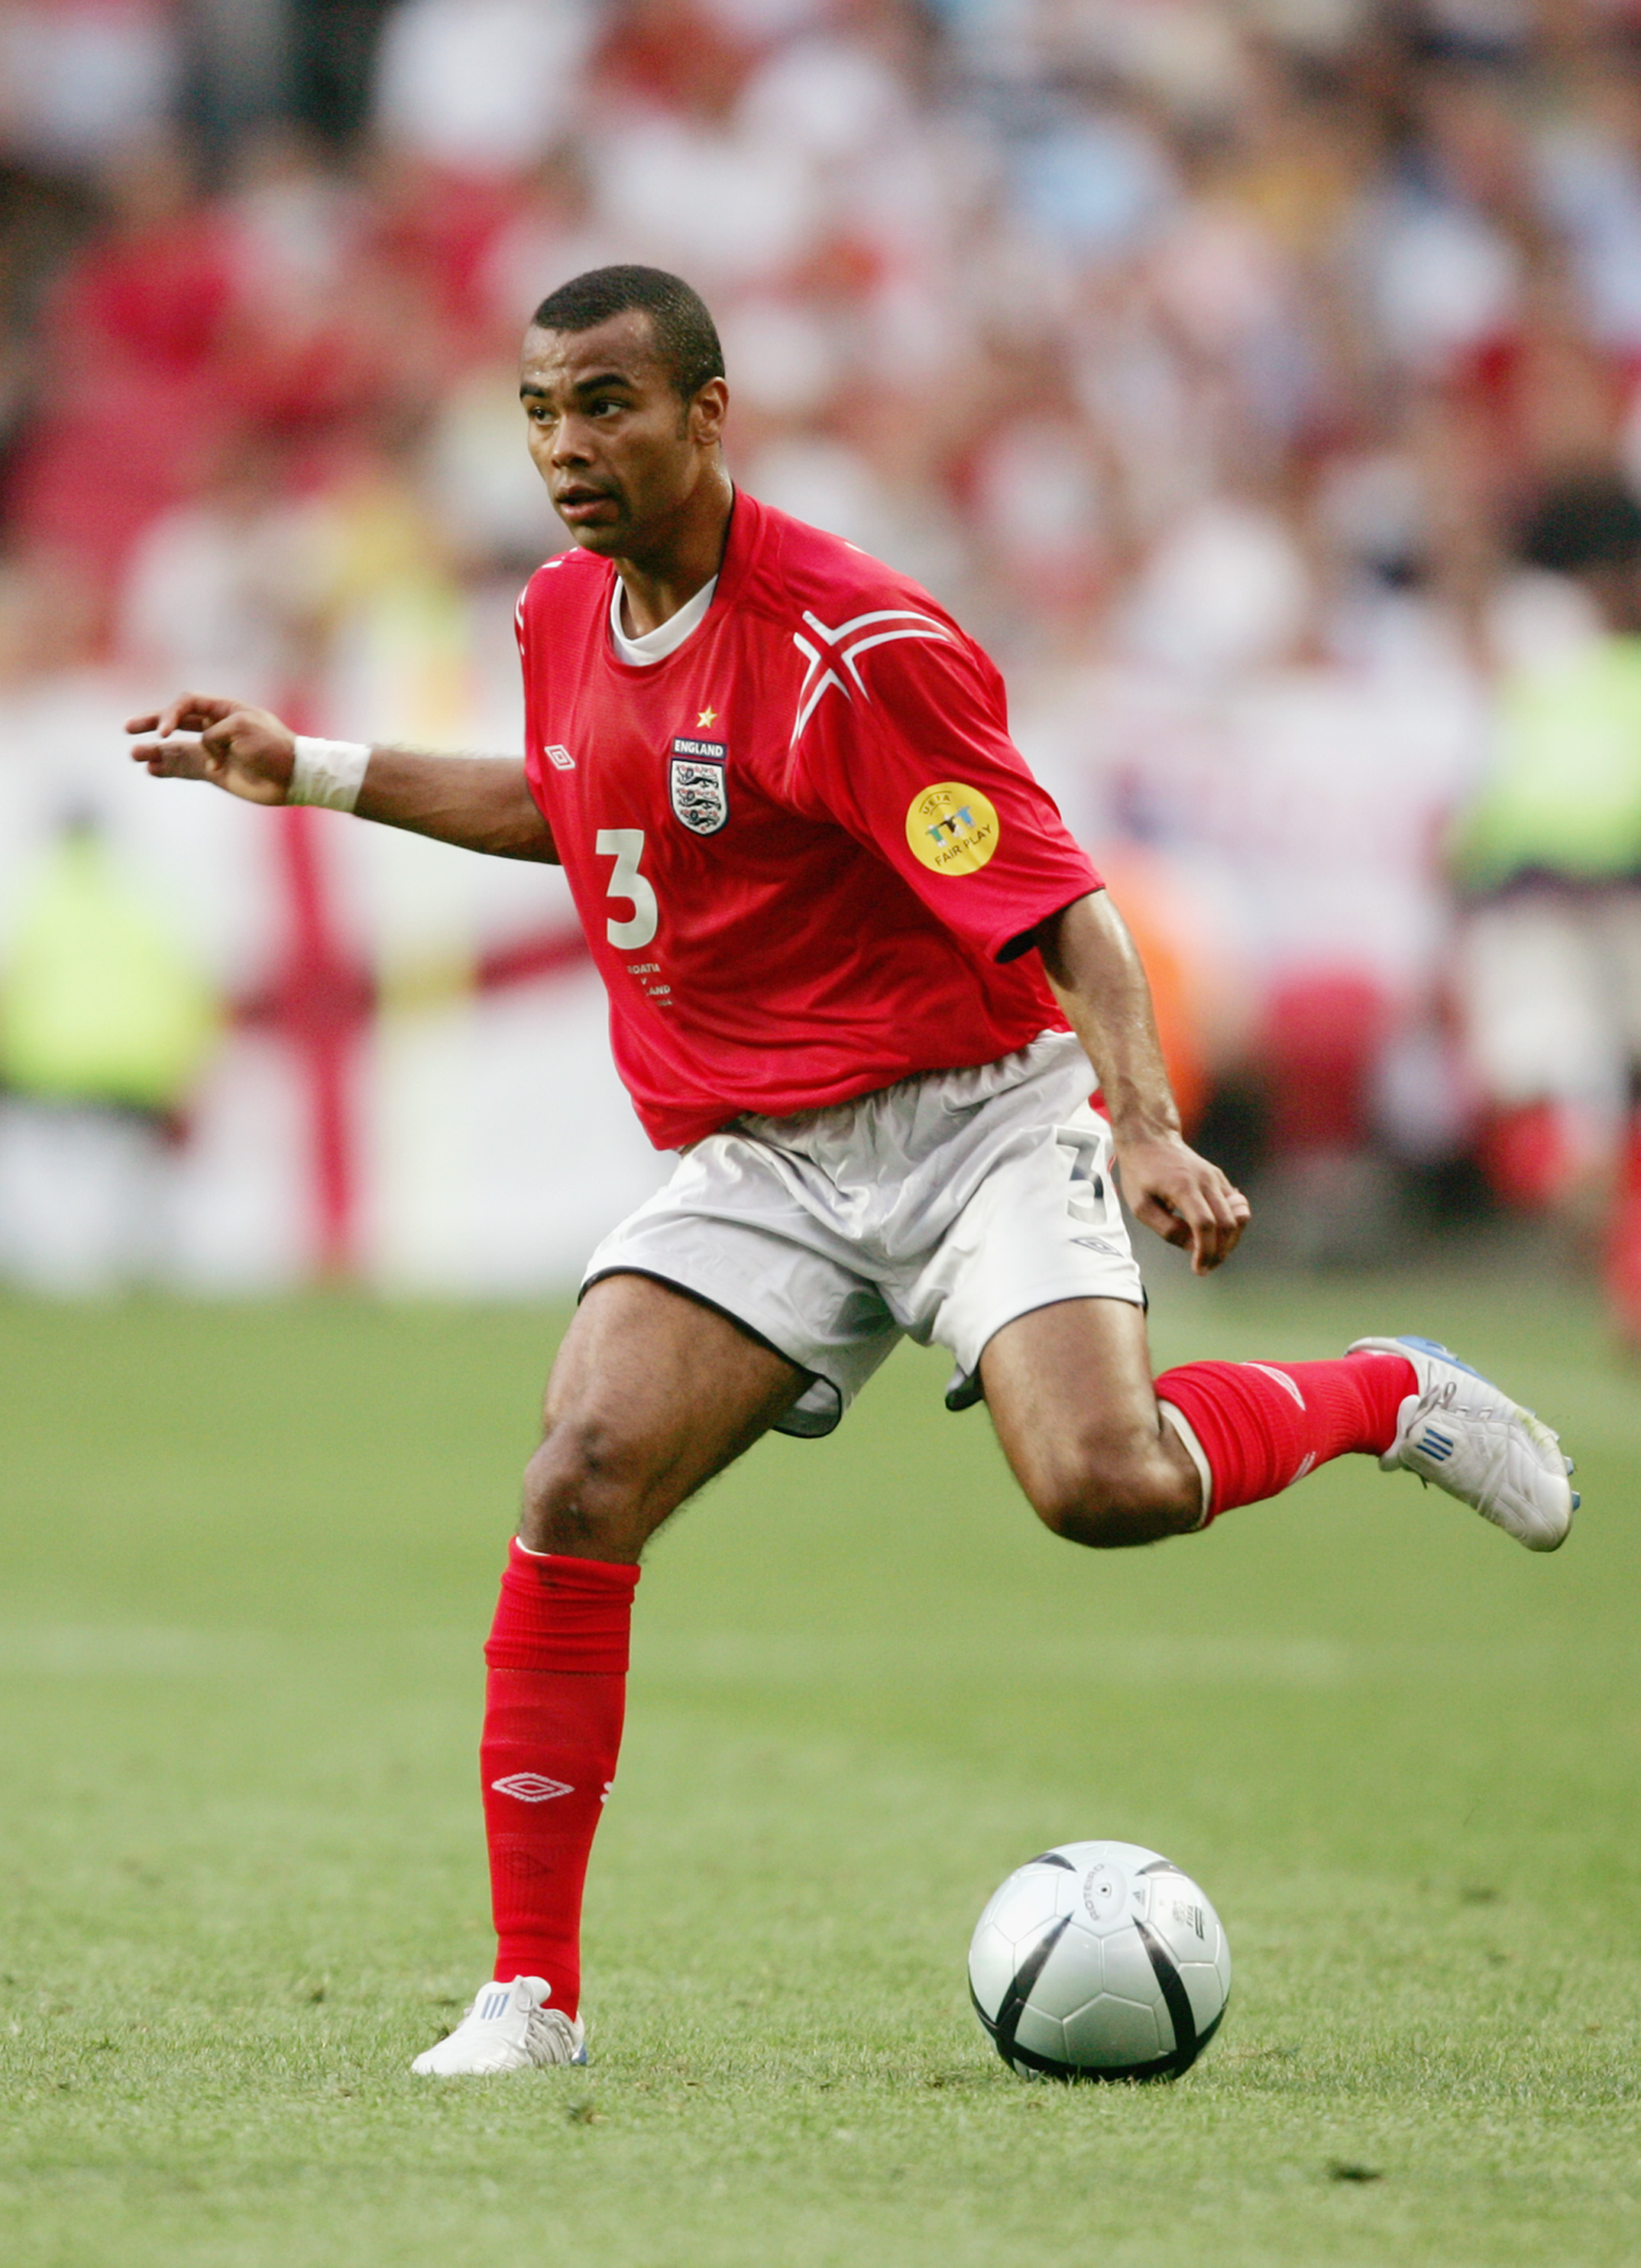 LISBON, PORTUGAL - JUNE 21:  Ashley Cole of England in action during the UEFA Euro 2004, Group B match between Croatia and England at the Luz Stadium on June 21, 2004 in Lisbon, Portugal. (Photo by Ross Kinnaird/Getty Images)